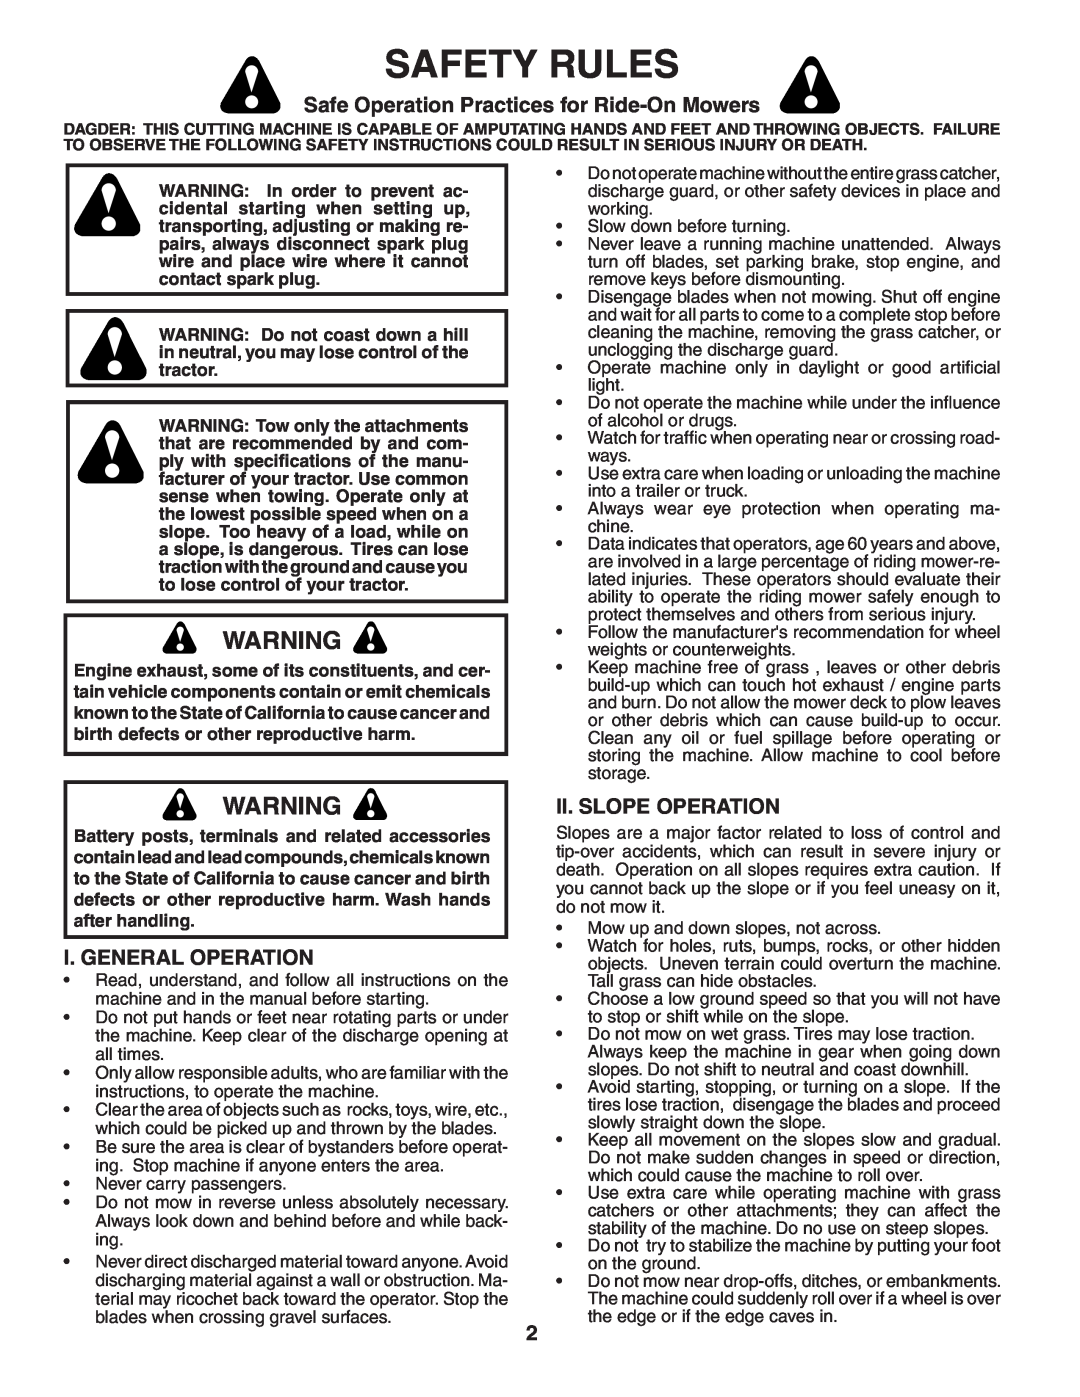 Poulan 404164 manual Safety Rules, Safe Operation Practices for Ride-On Mowers, I. General Operation, Ii. Slope Operation 